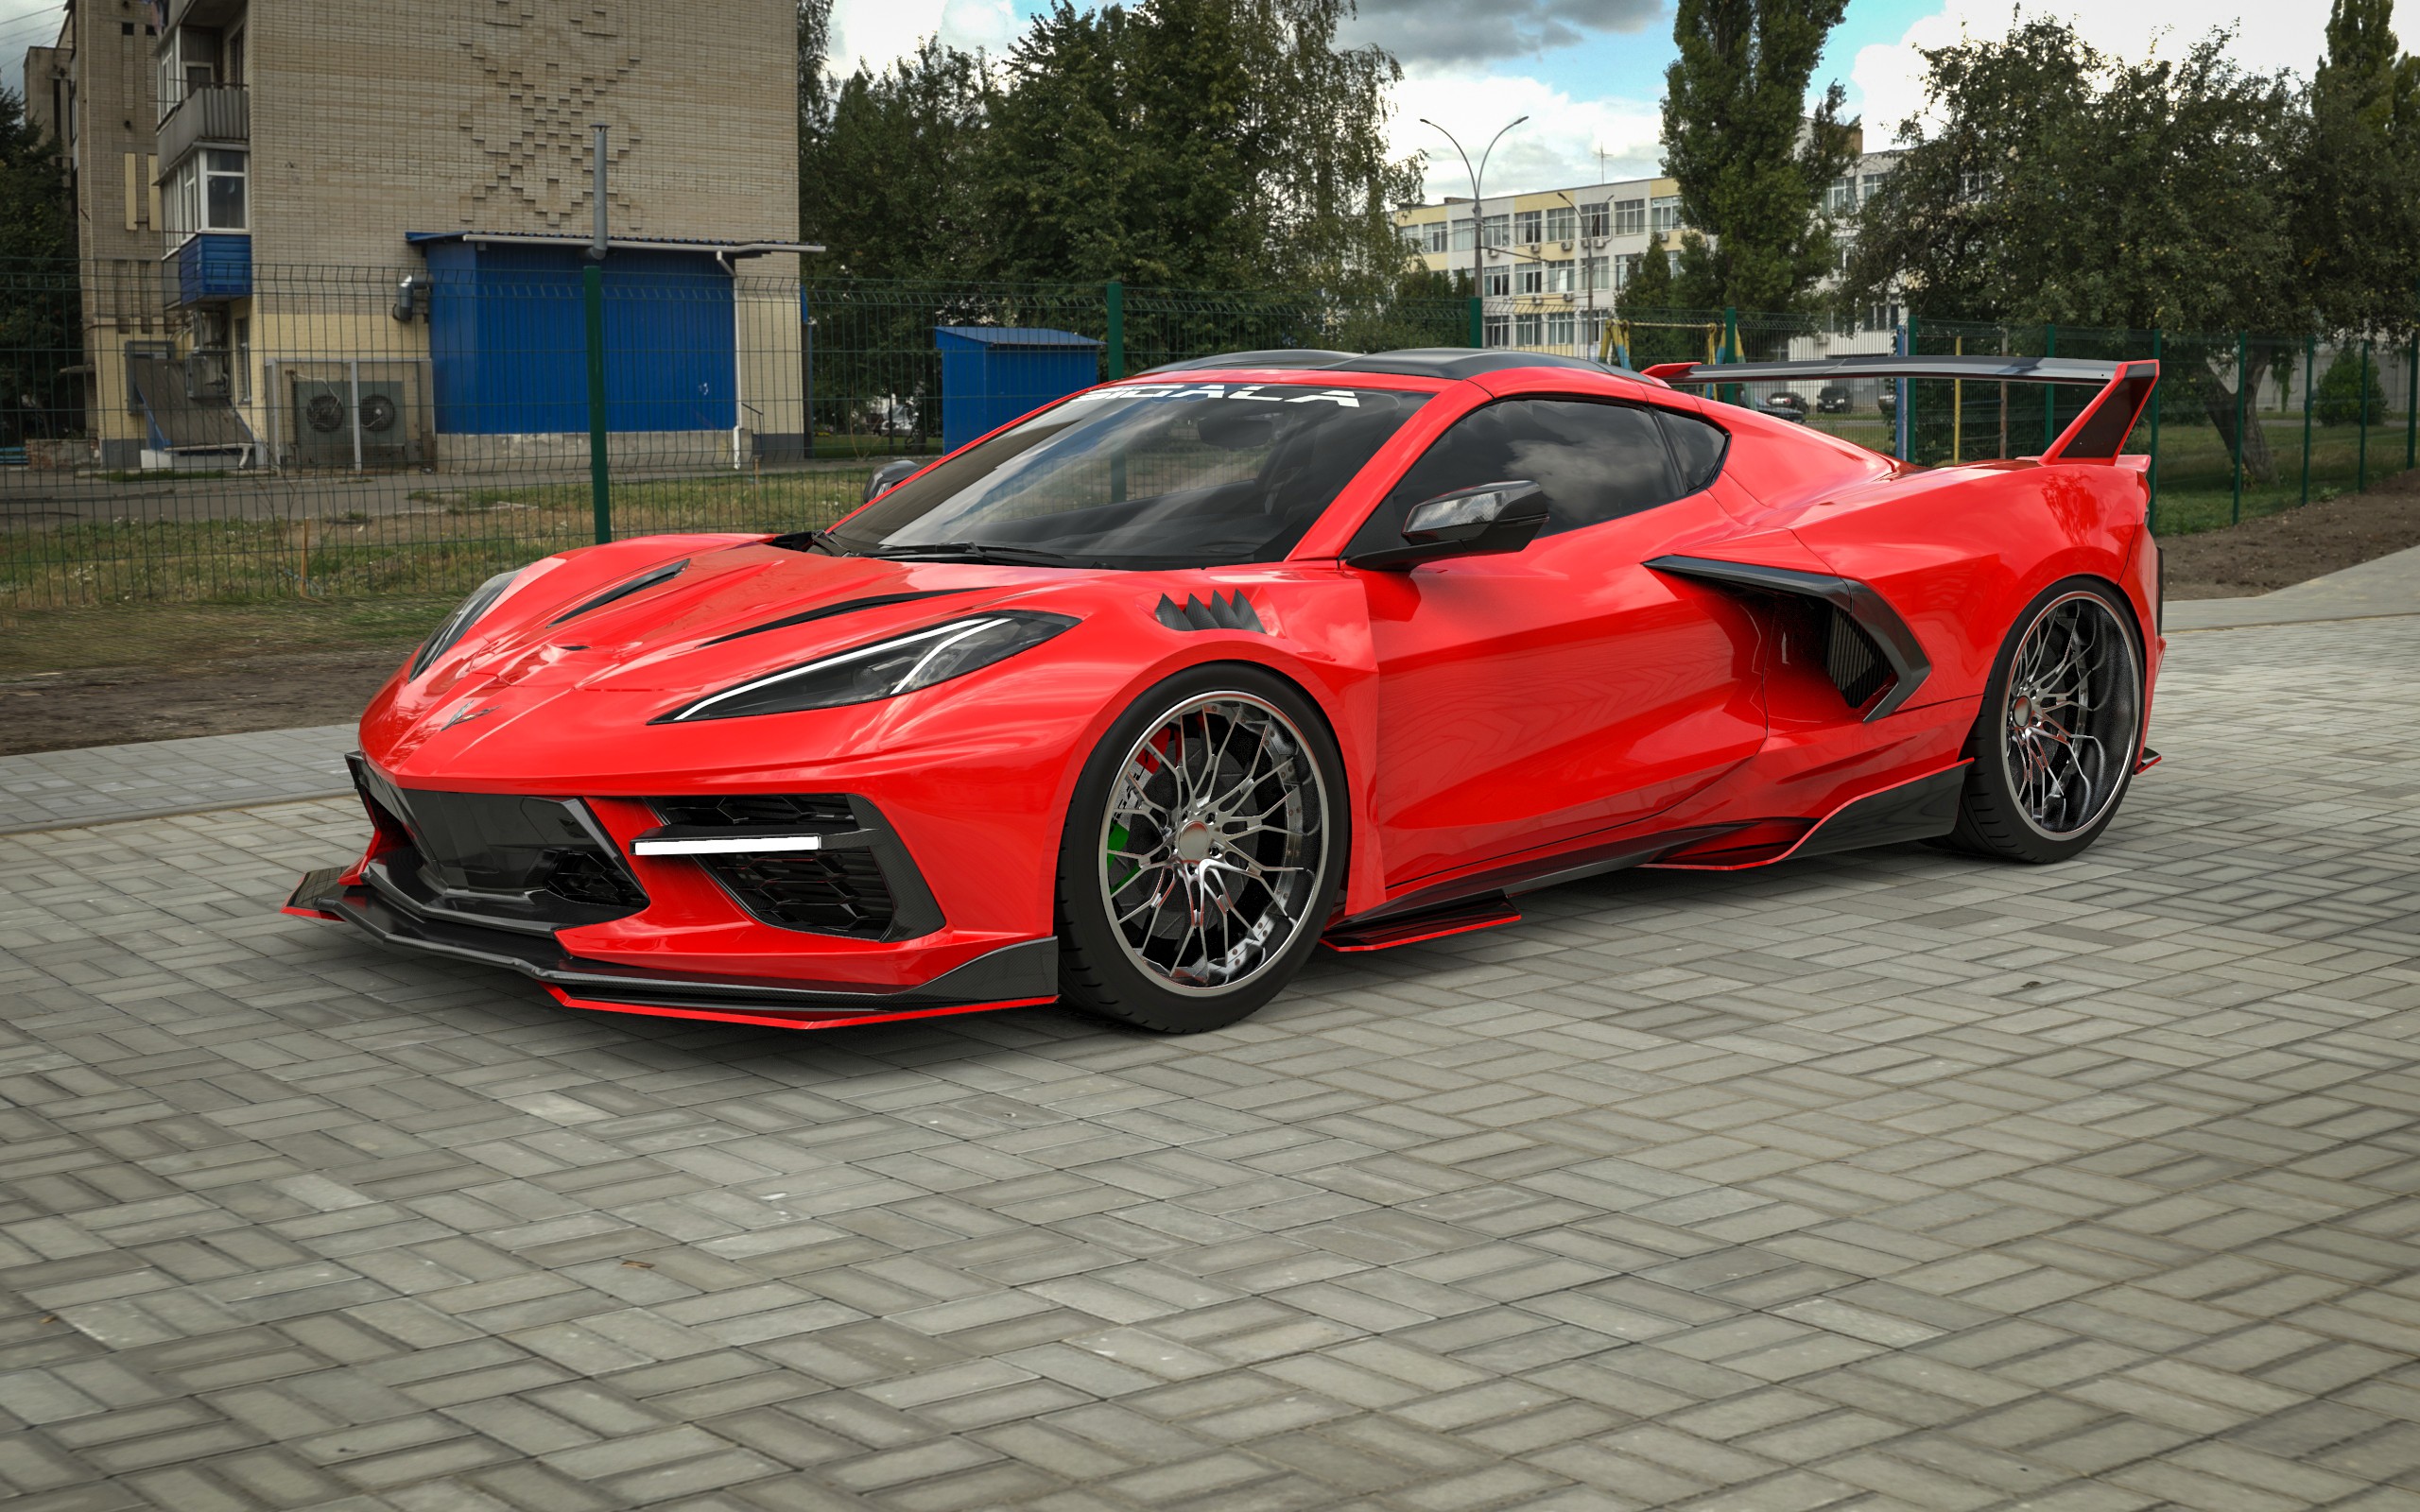 Widebody C8 Corvette “c8rr” By Sigala Designs Looks Awesome Coming